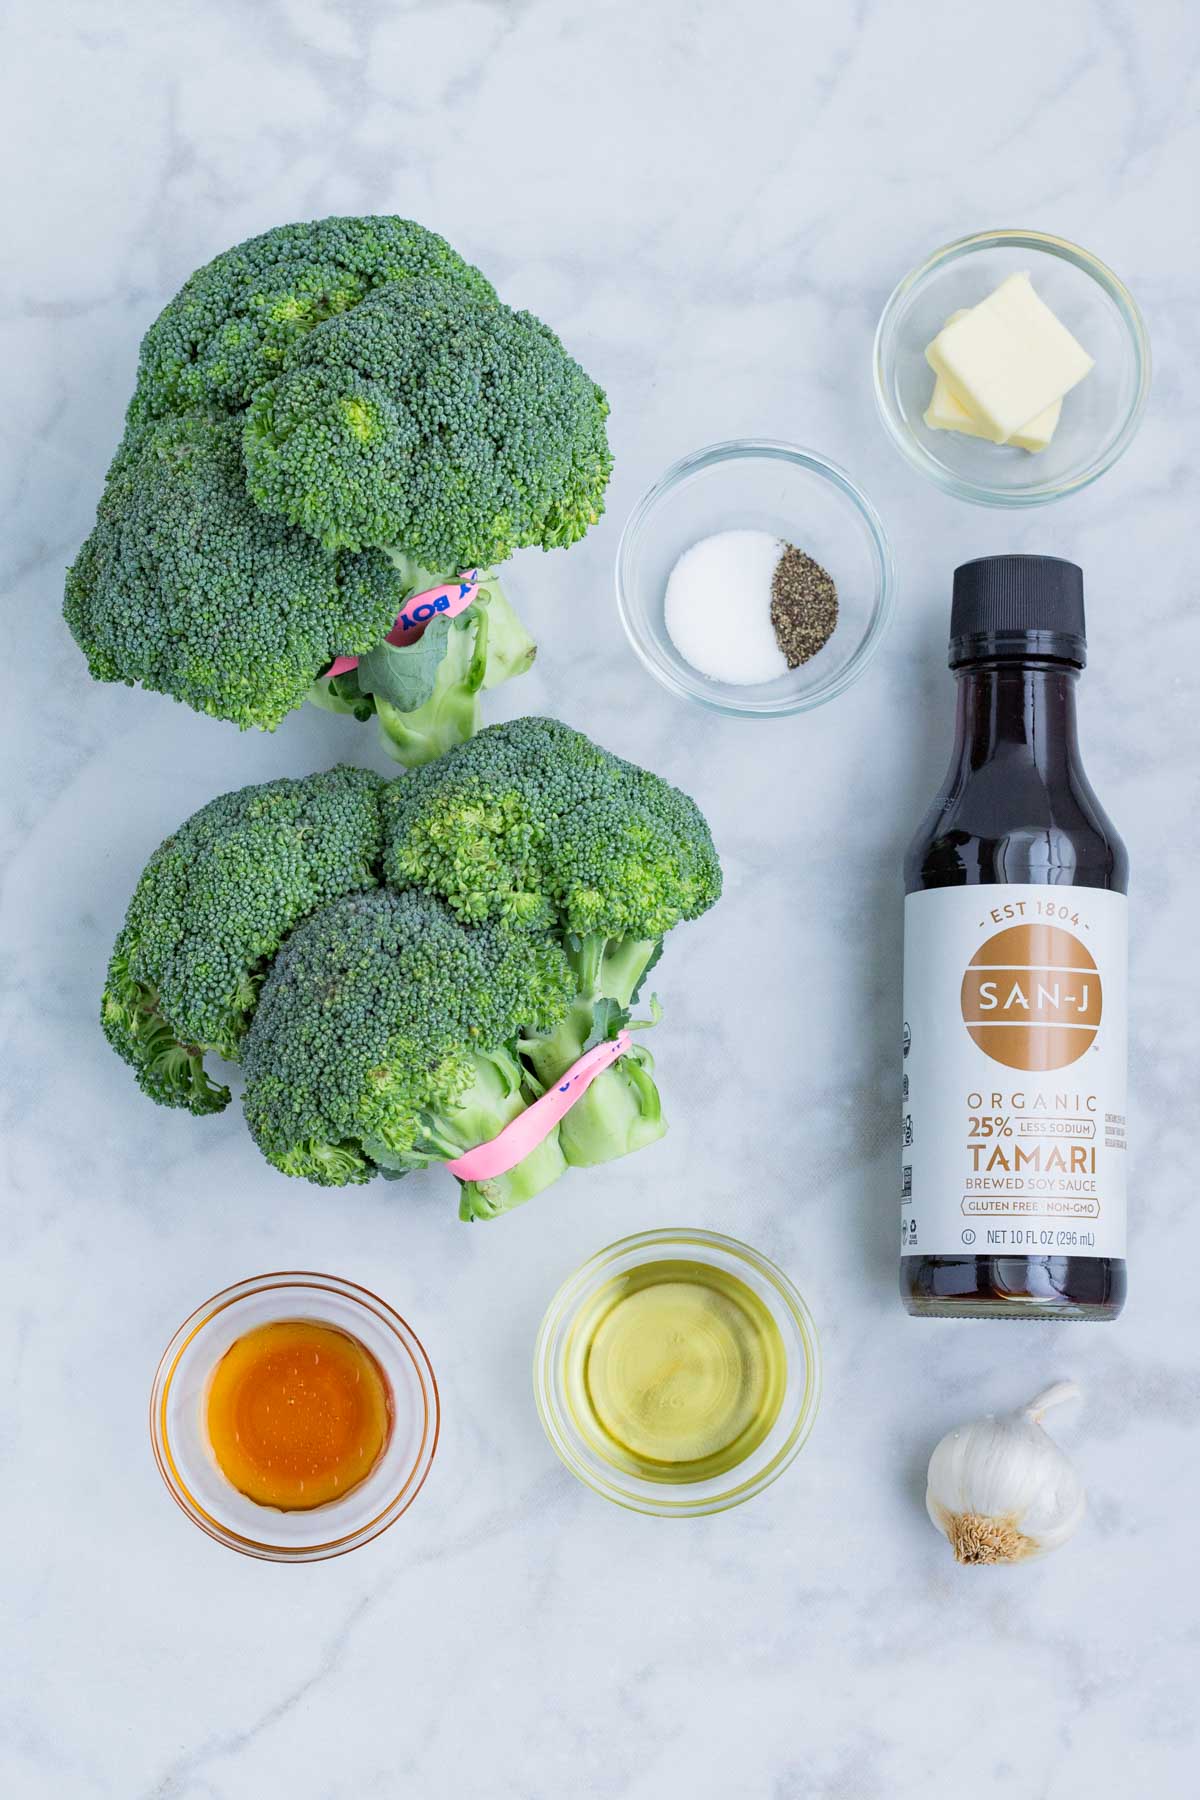 Broccoli, seasonings, oil, butter, and soy sauce are the ingredients for this recipe.